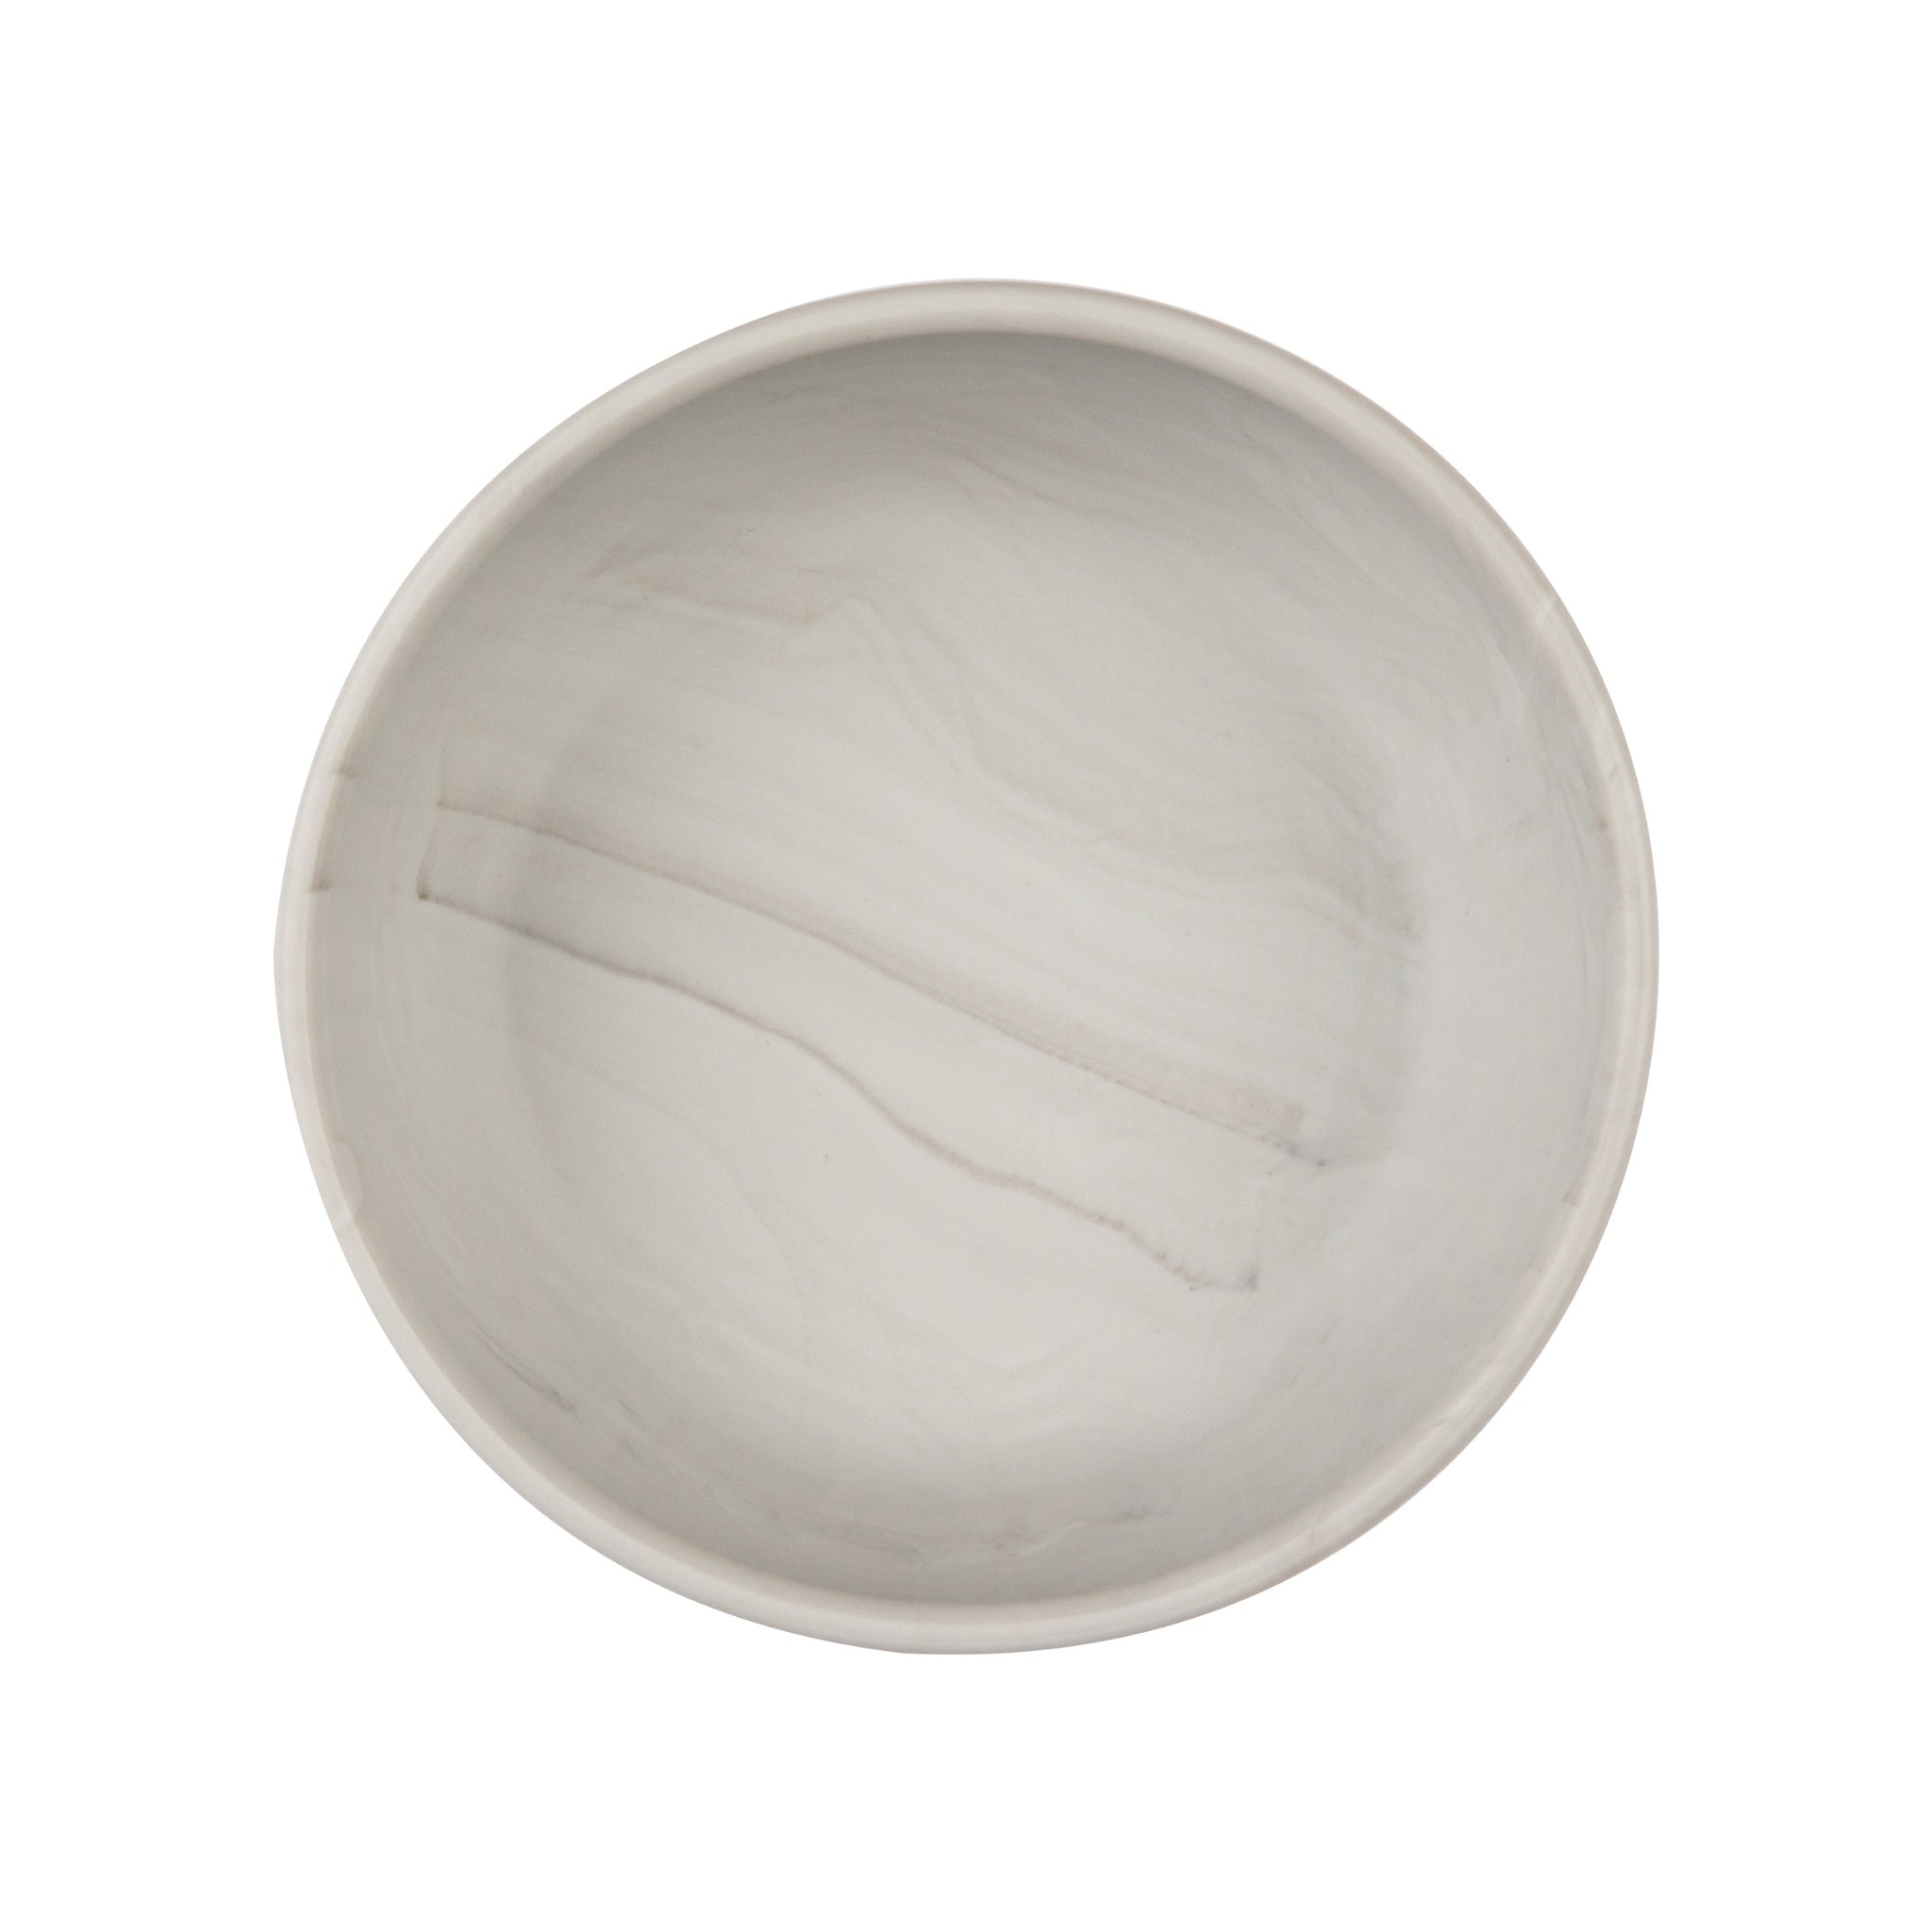 *eeveve* Silicone Bowl small シリコンボウル S - Marble - Cloudy Gray